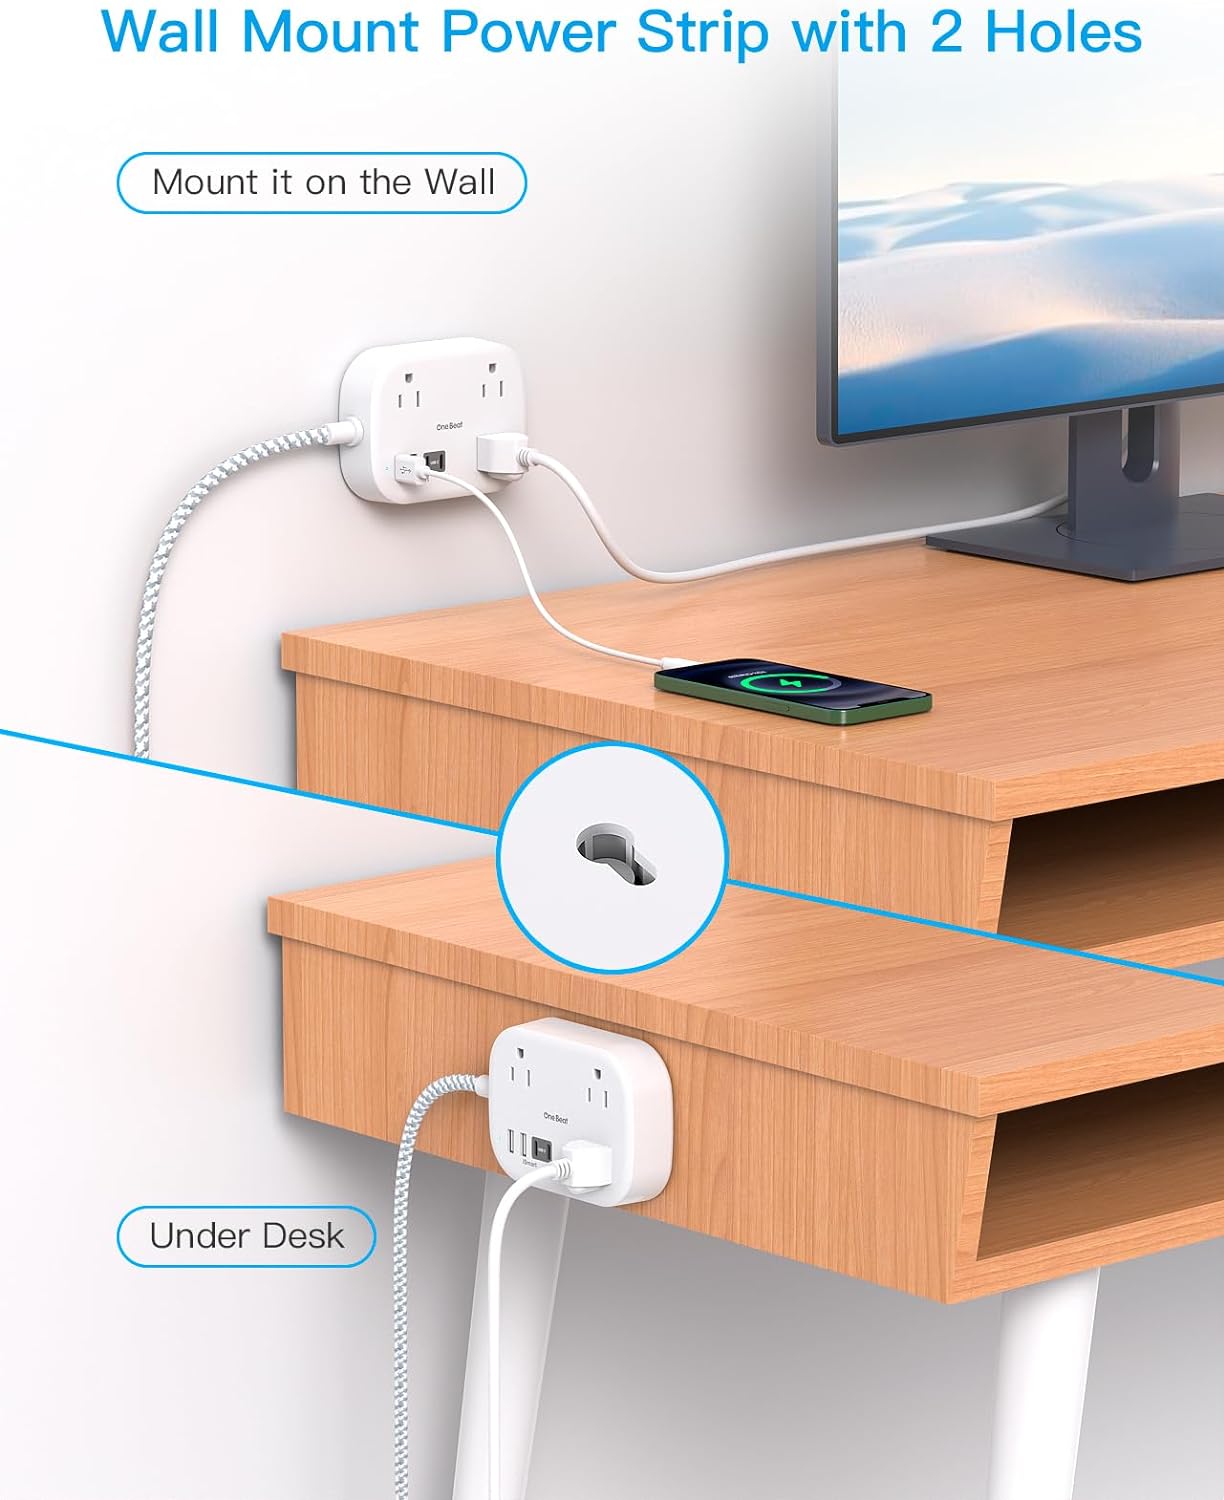 Travel Power Strip, Cruise Ship Essentials with USB C, Flat Plug Extension Cord with 3 Outlets 4 USB Ports(2 USB C), 5 ft Desk Wall Outlet Extender, Non Surge Protector for Cruise, Dorm Room, ETL